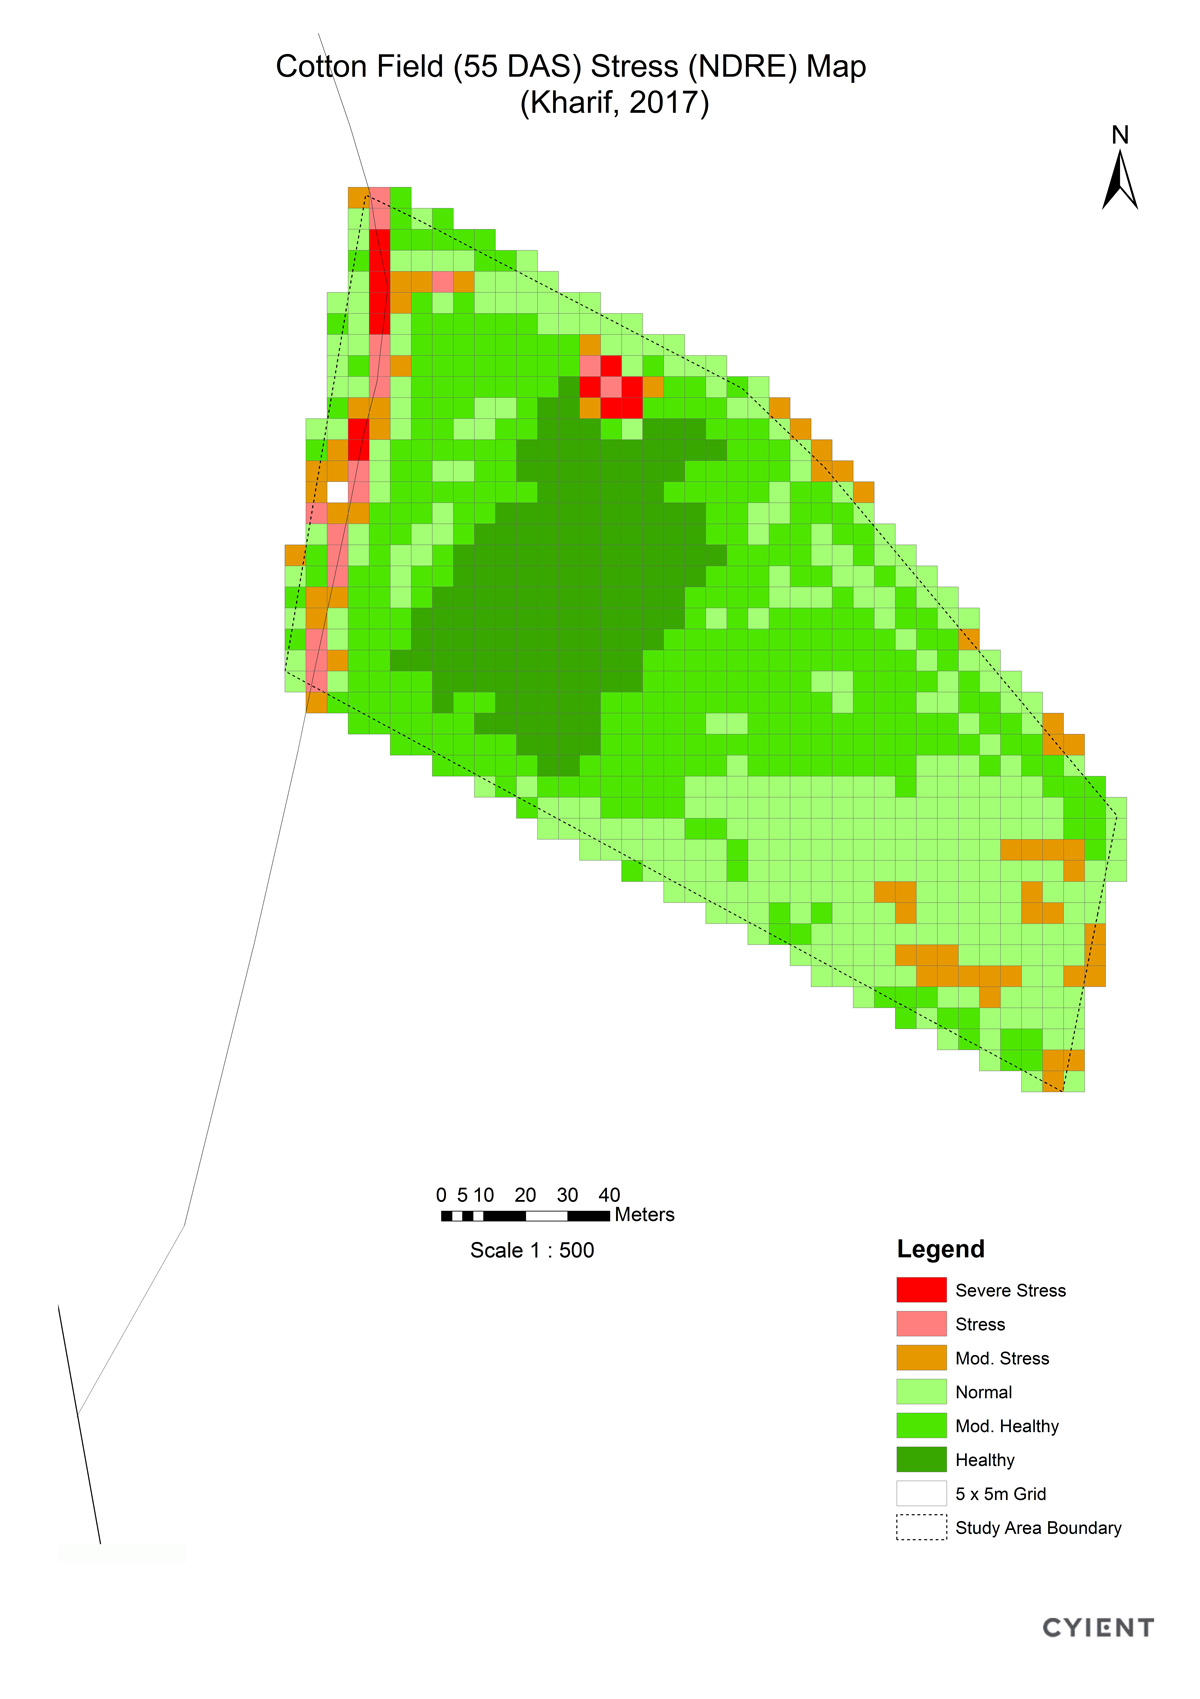 A map generated by Cyient based on data captured by the drones showing the health of a cotton field. 